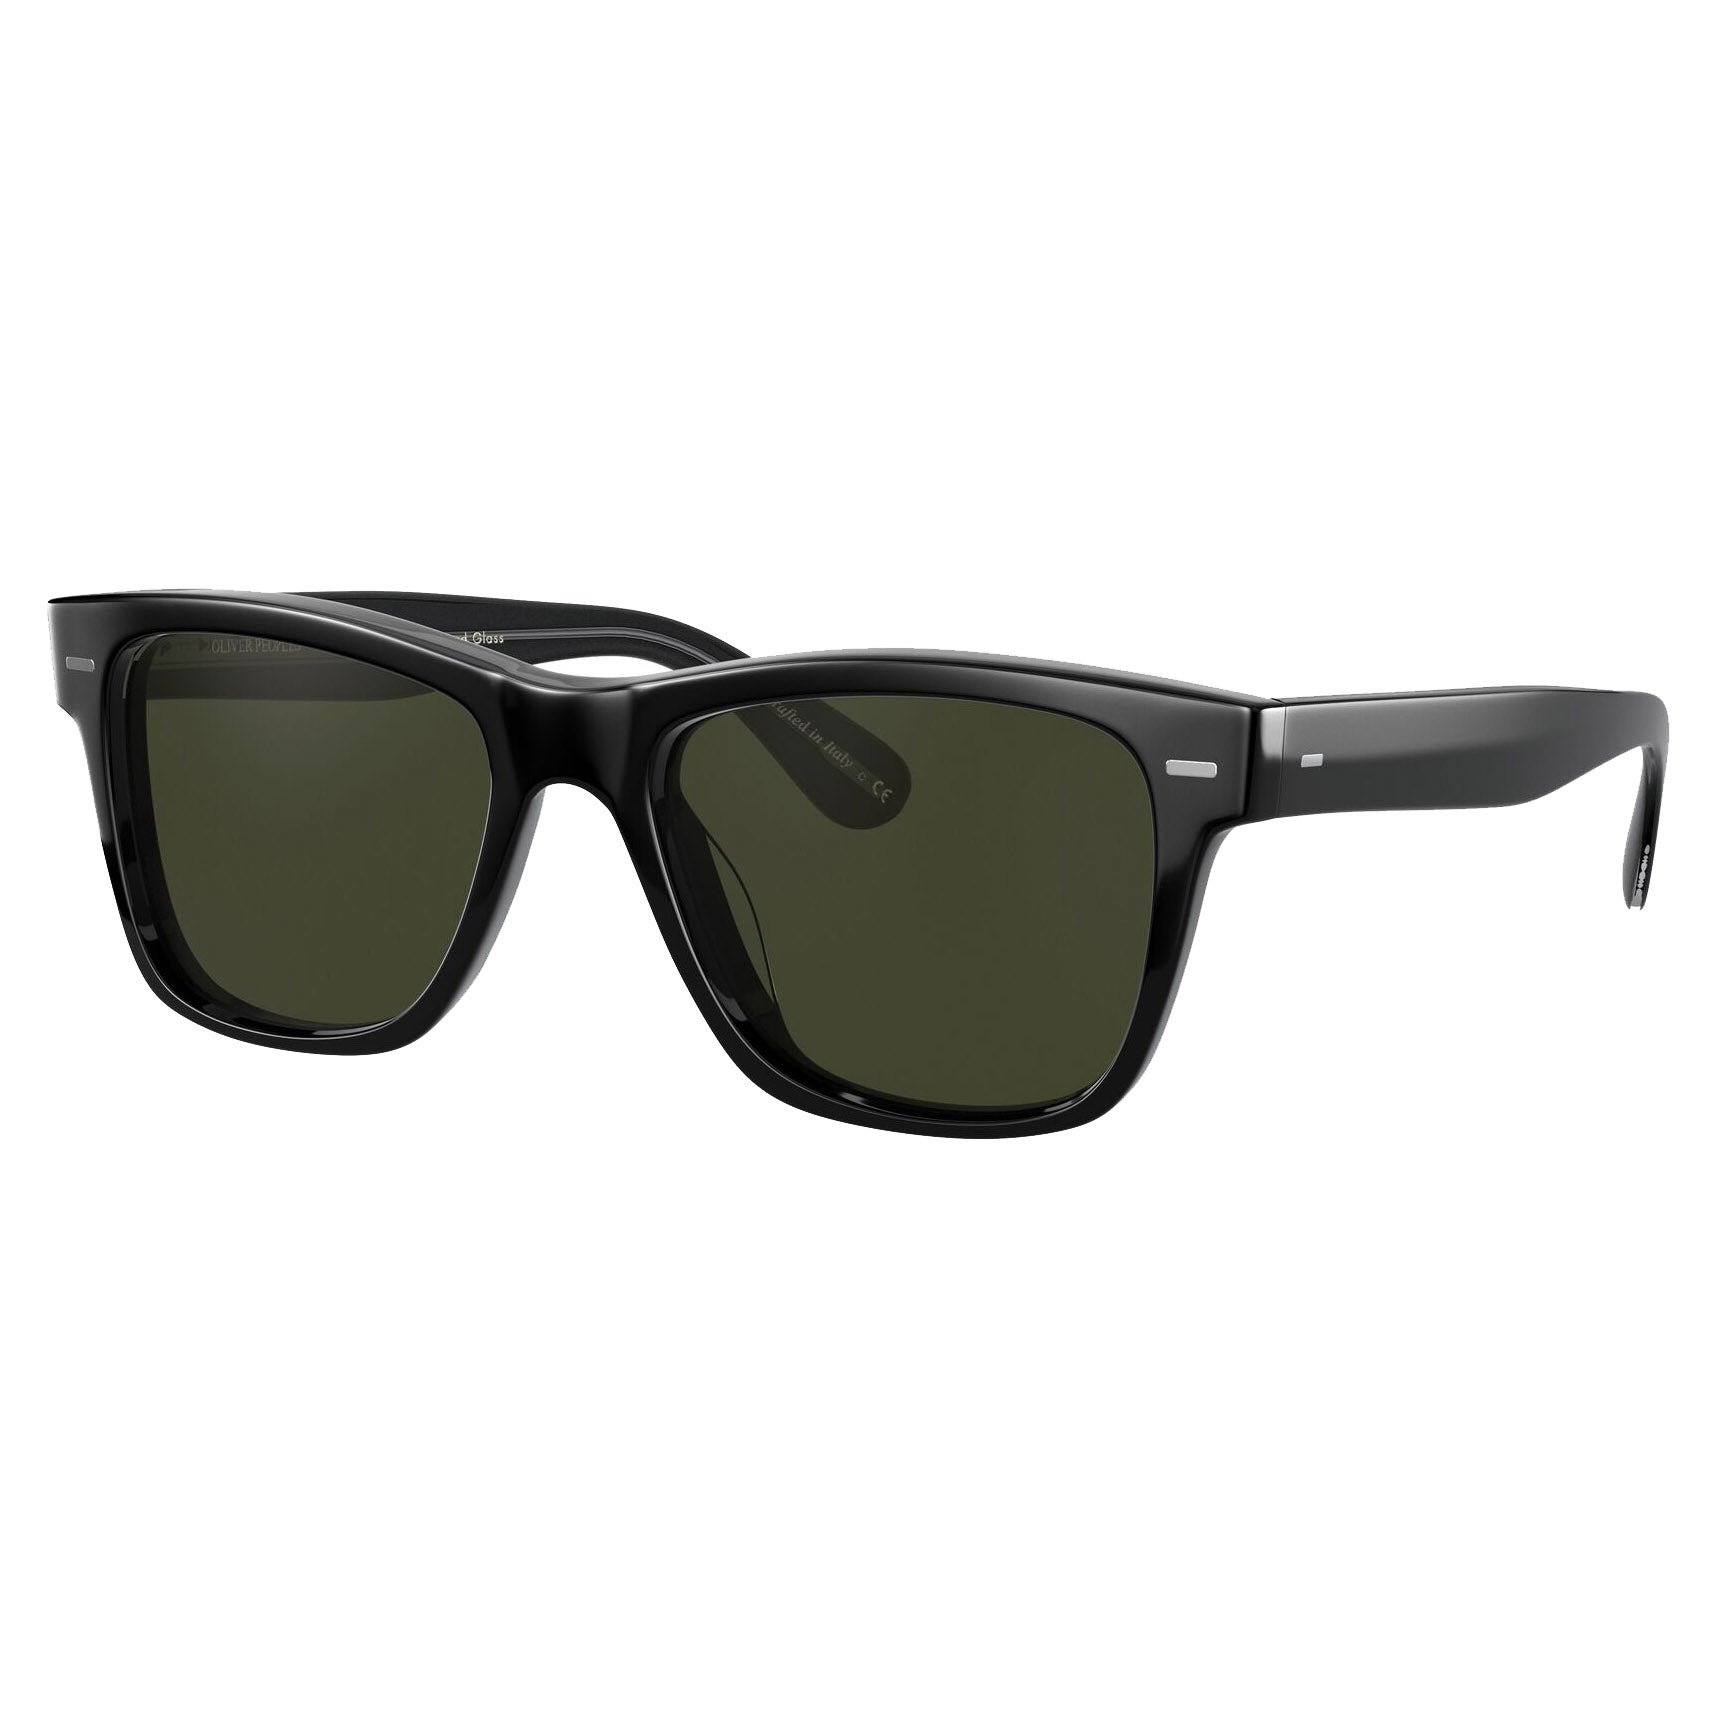 Oliver Peoples Oliver Sun Black with G-15 Polar Sunglasses